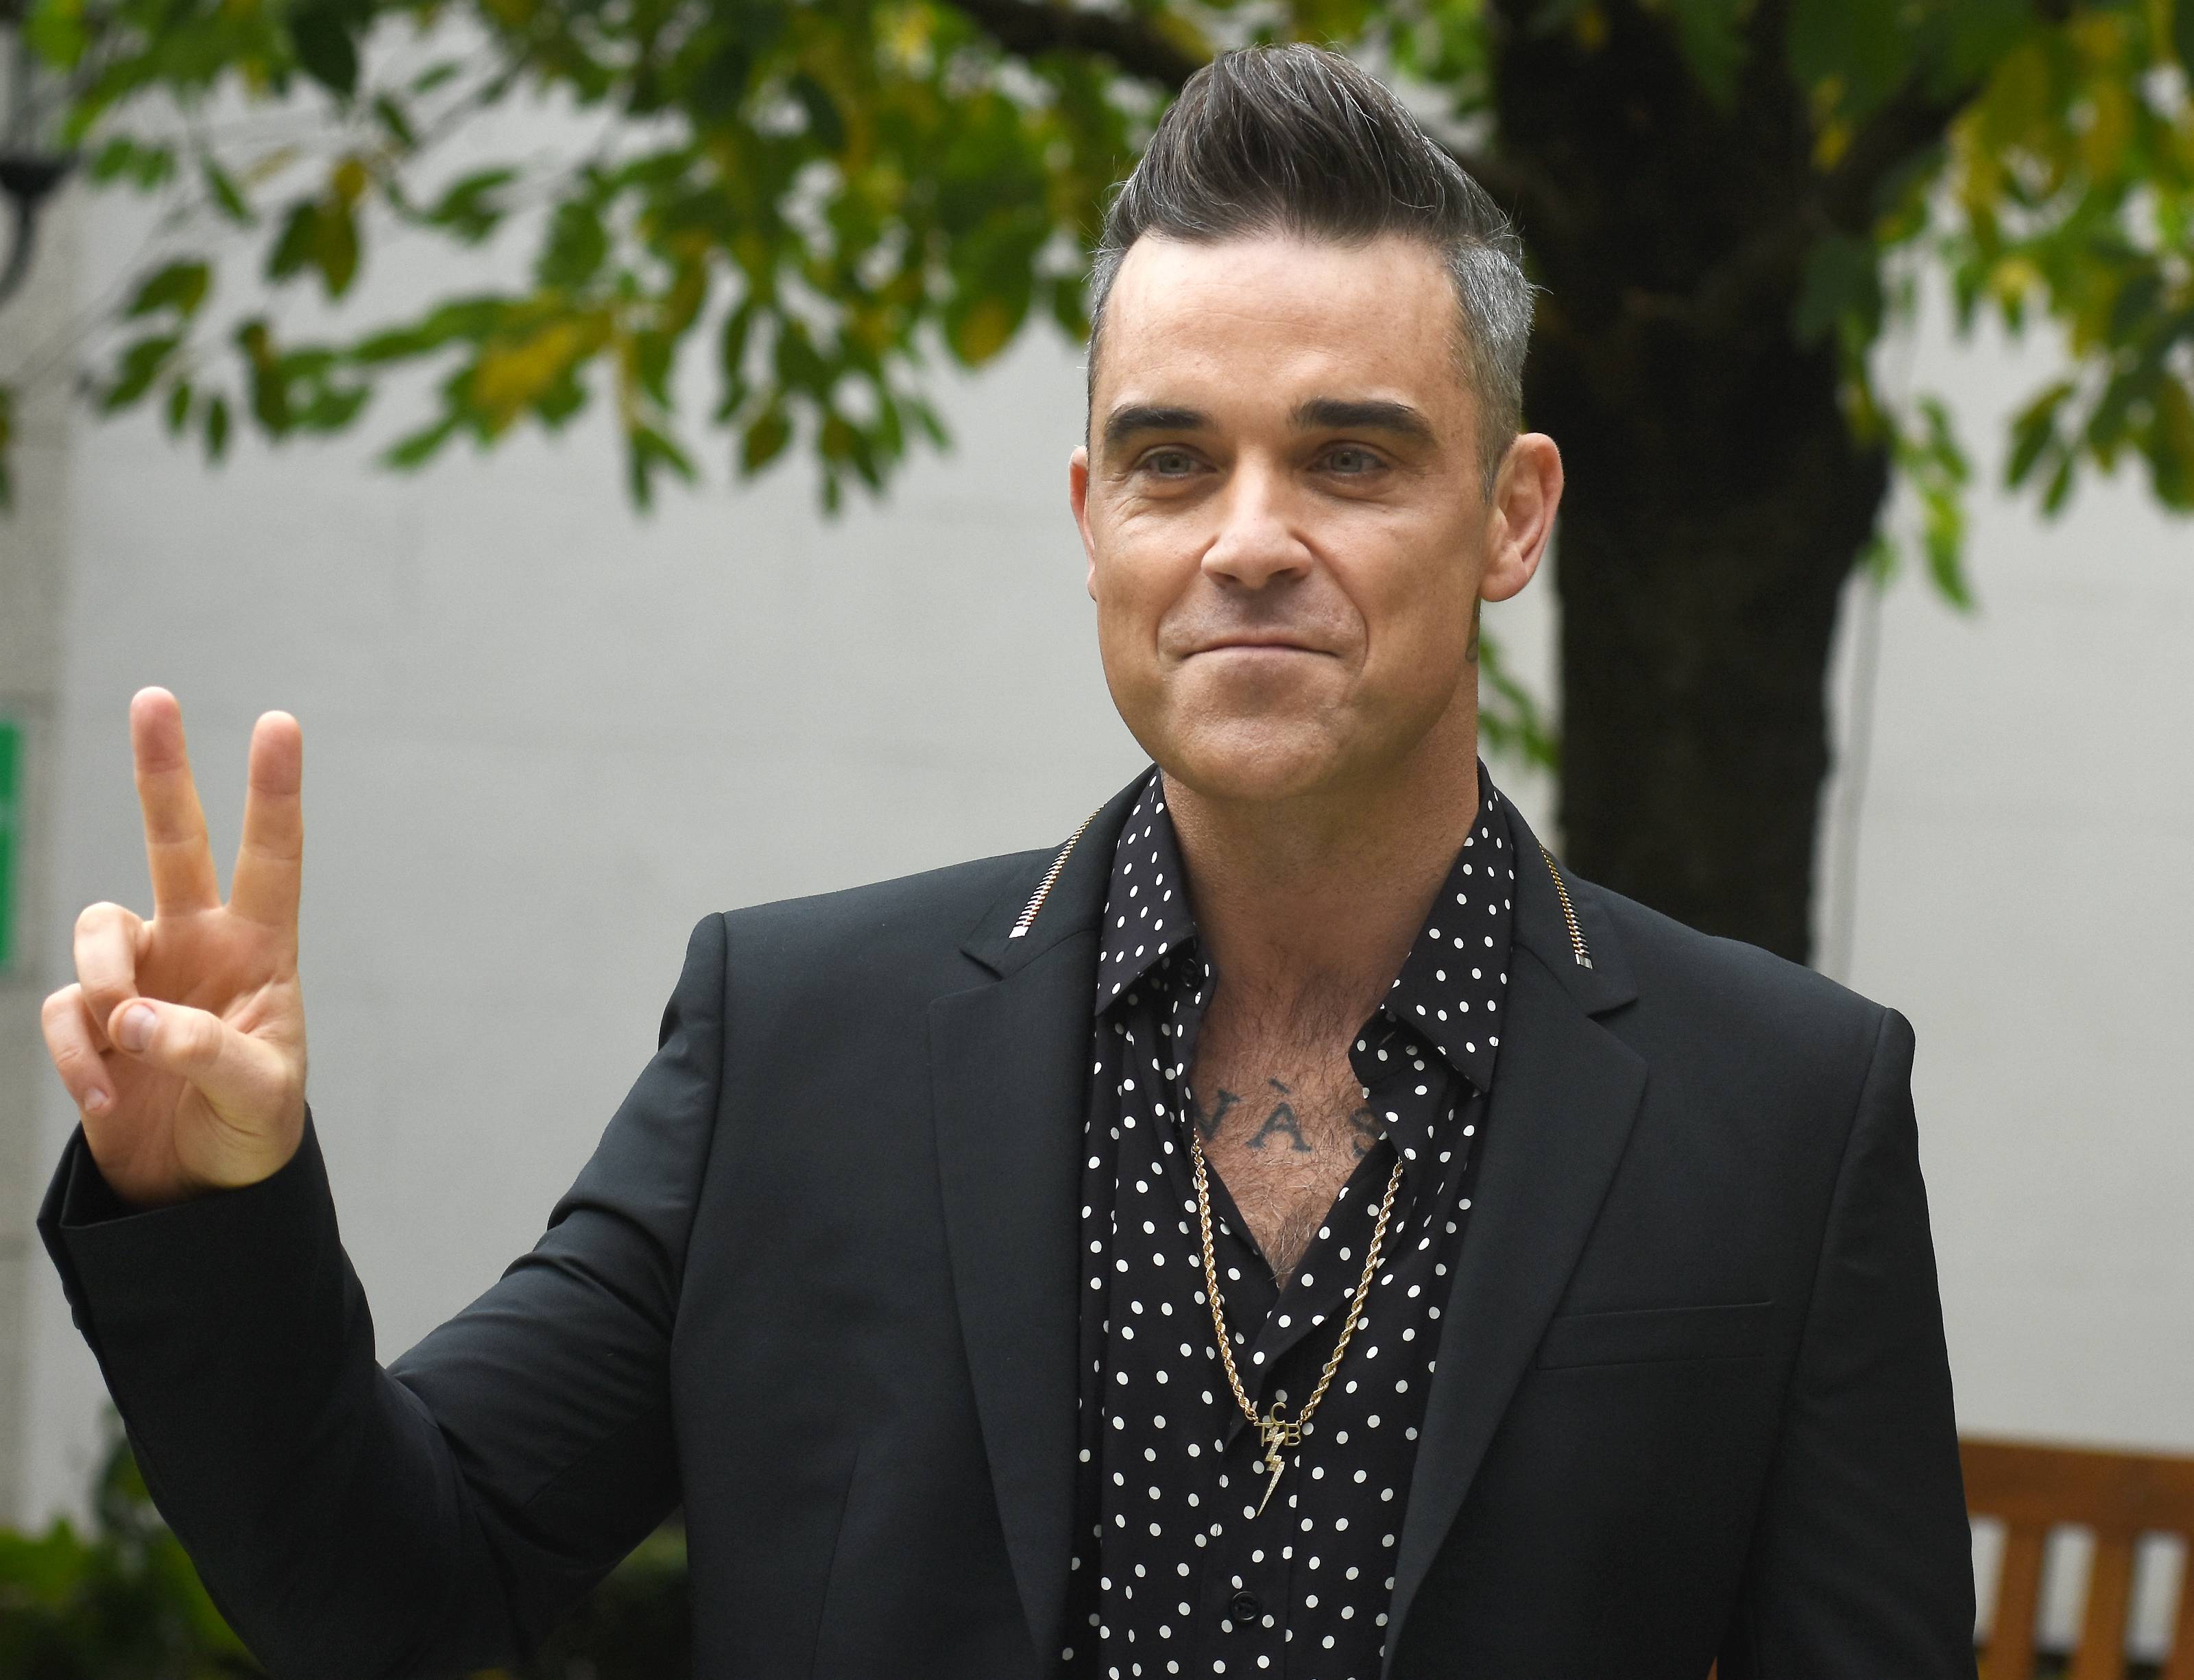 Robbie Williams may face fine for obscene gesture during World Cup ...